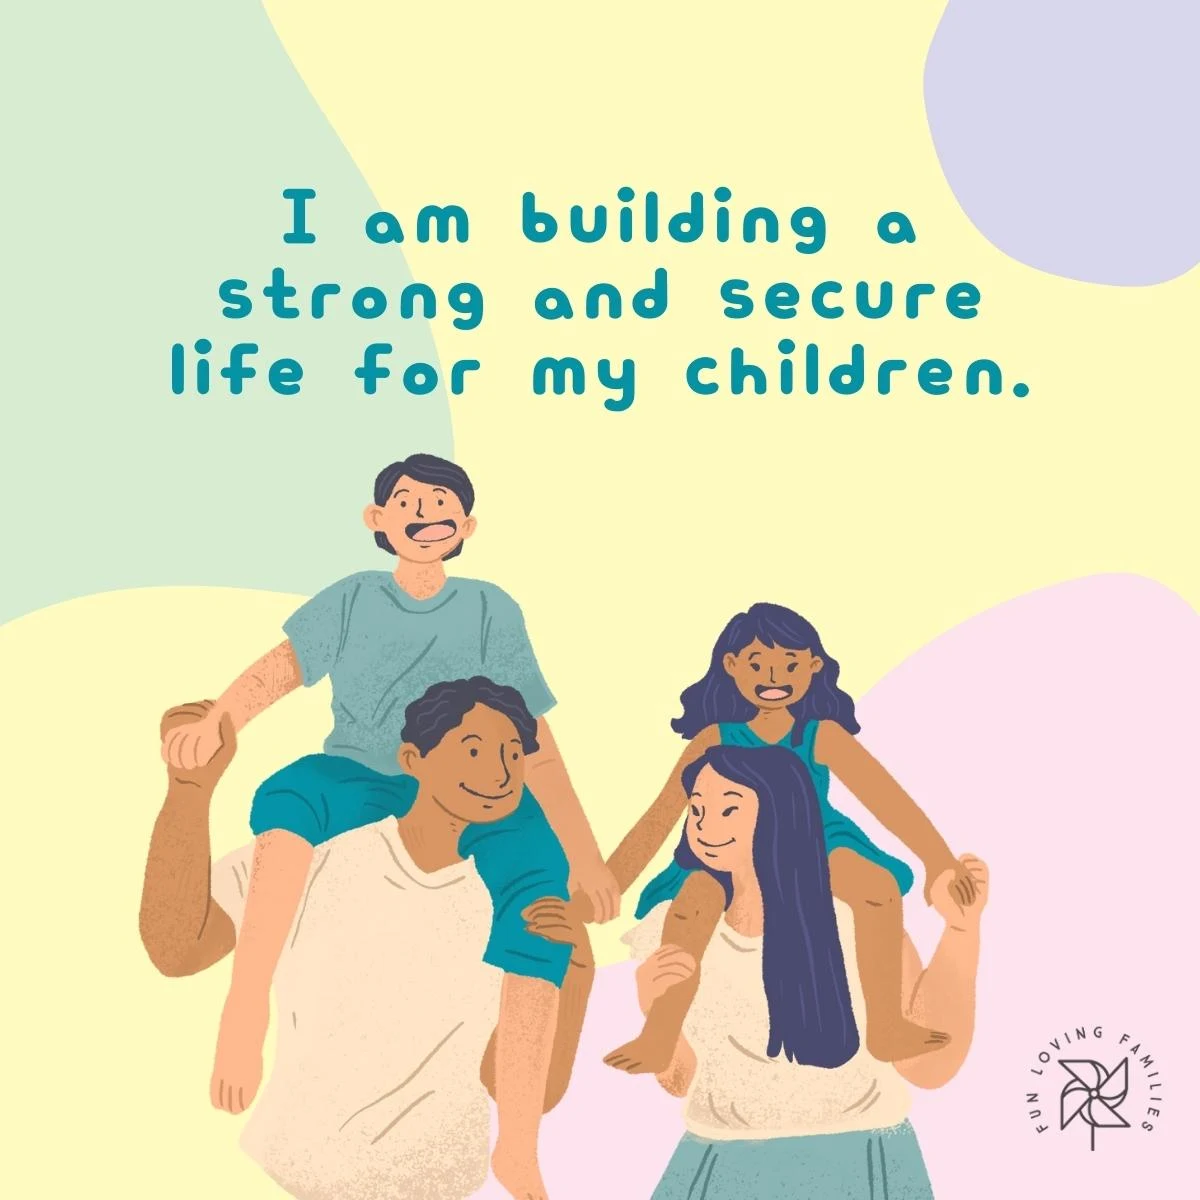 I am building a strong and secure life for my children affirmation